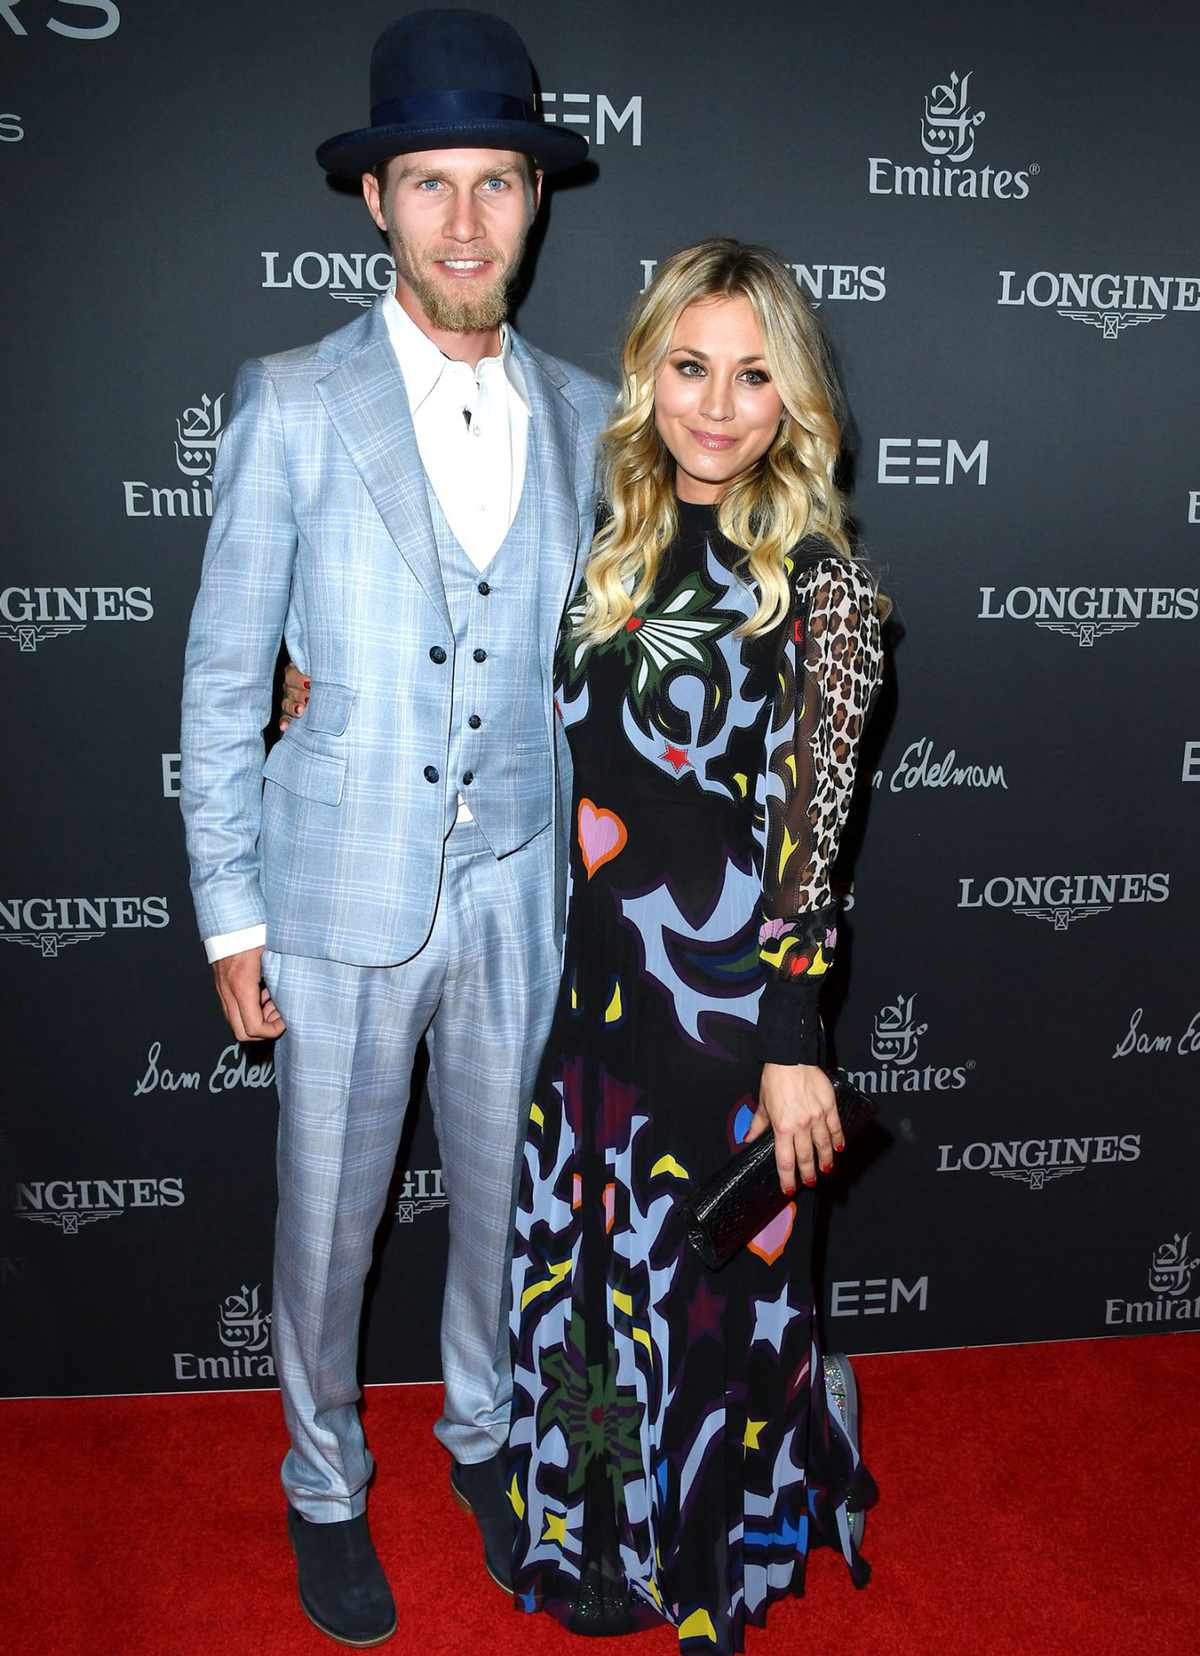 LONG BEACH, CA - SEPTEMBER 29:  Kaley Cuoco, Karl Cook arrives at the Longines Masters Los Angeles - Gala at Long Beach Convention Center on September 29, 2016 in Long Beach, California.  (Photo by Steve Granitz/WireImage)